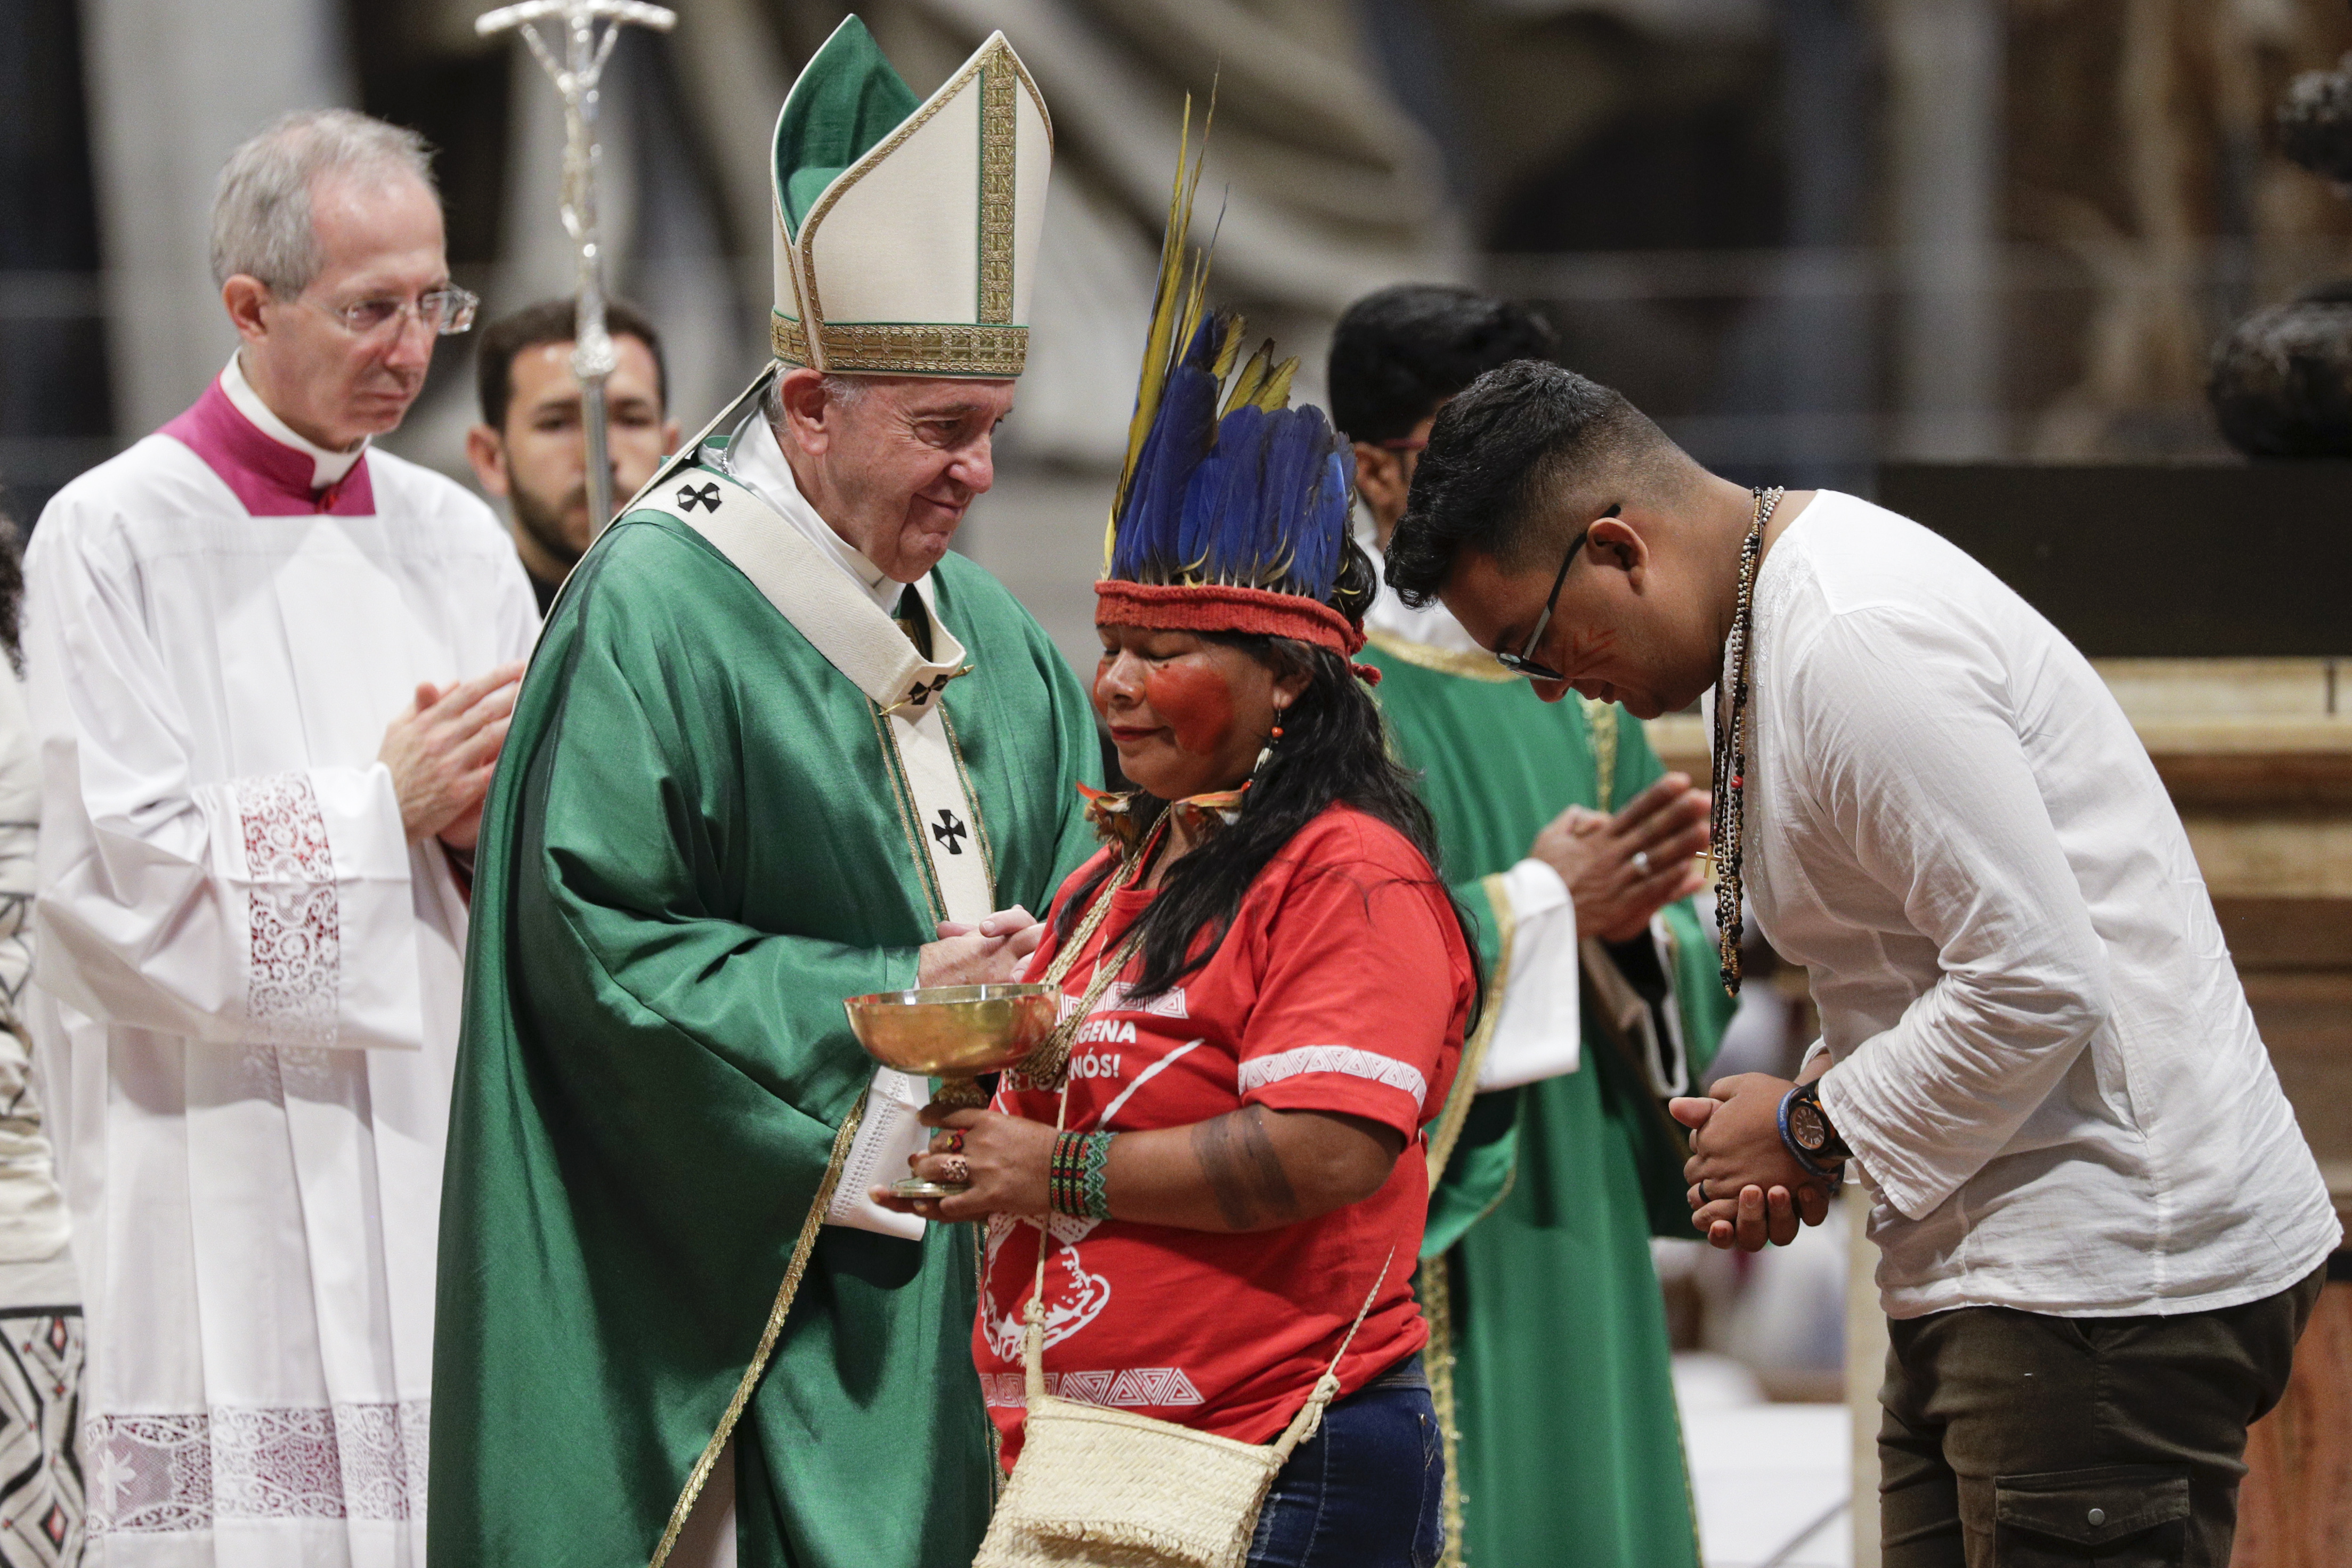 Indigenous peoples, some with their faces painted and wearing feathered headdresses, stand by  Pope Francis as he celebrates an opening Mass for the Amazon synod, in St. Peter's Basilica, at the Vatican, Sunday, Oct. 6, 2019. Pope Francis is opening a divisive meeting on preserving the Amazon and ministering to its indigenous peoples, as he fends off attacks from conservatives who are opposed to his ecological agenda. (AP Photo/Andrew Medichini)